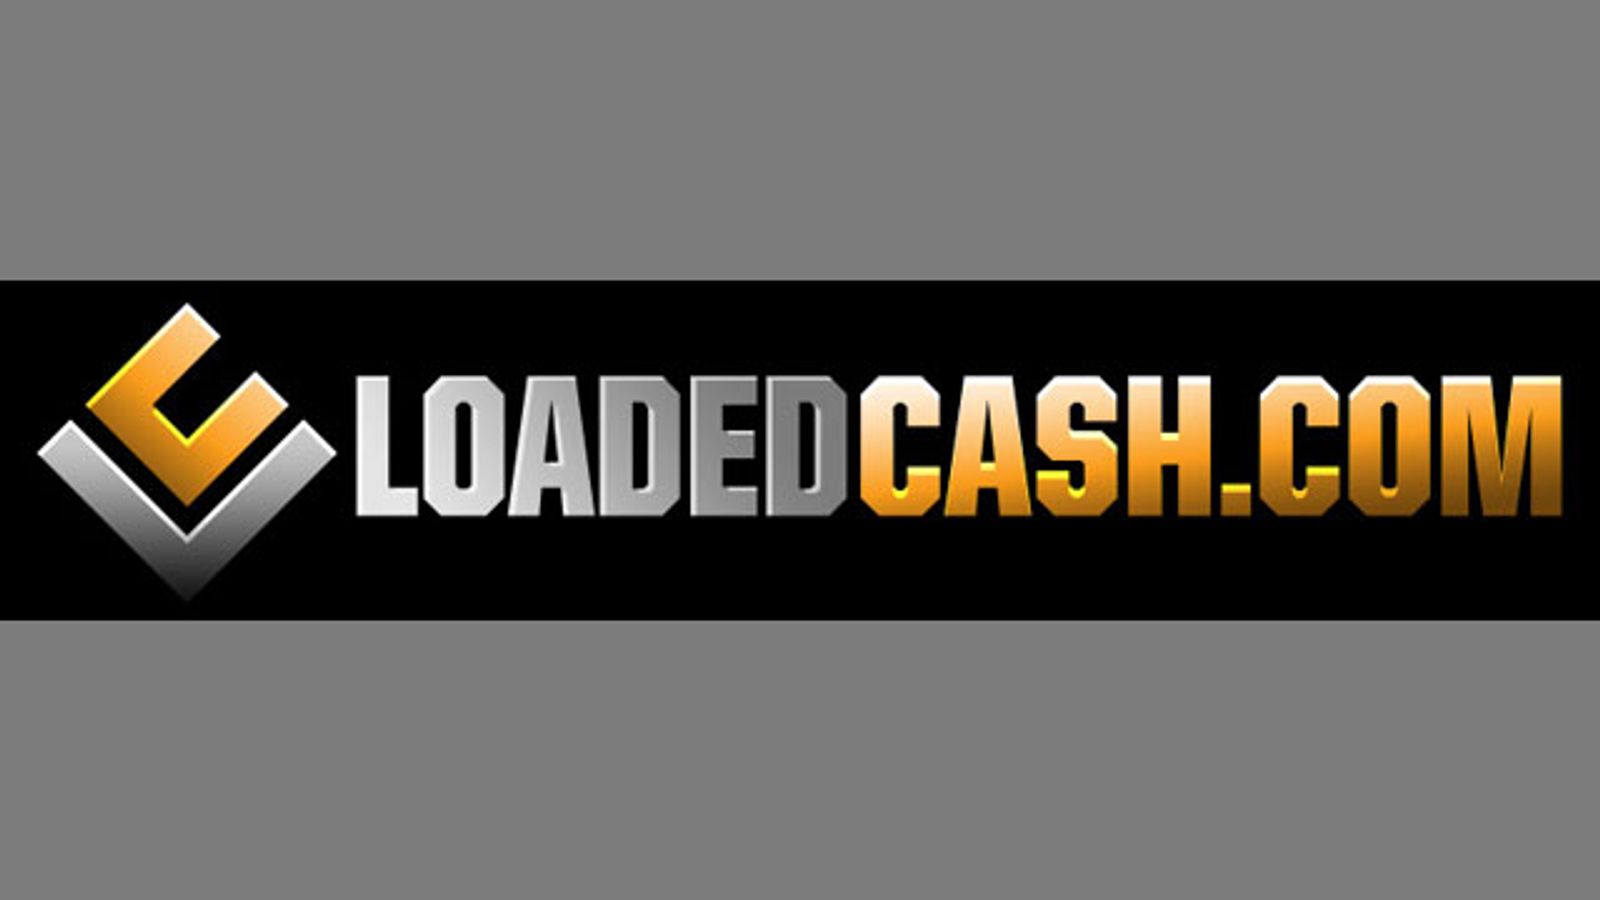 LoadedCash Launches Unique Activity Feed Tool and Promo